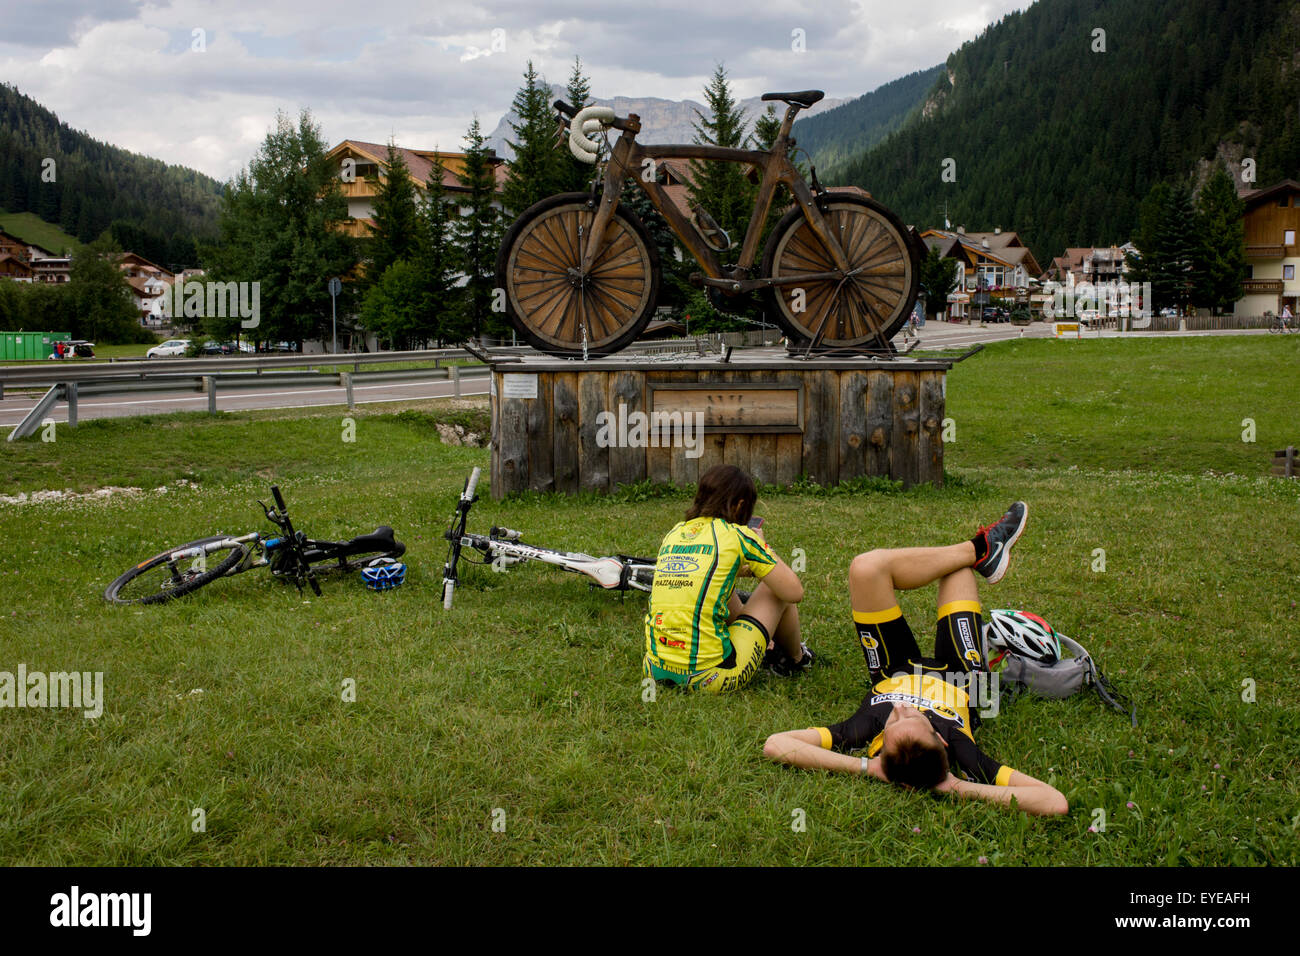 Cyclists rest by a large wooden mountain bike sculpture in the town of Corvara during the summer walking season in south Tyrol. Stock Photo